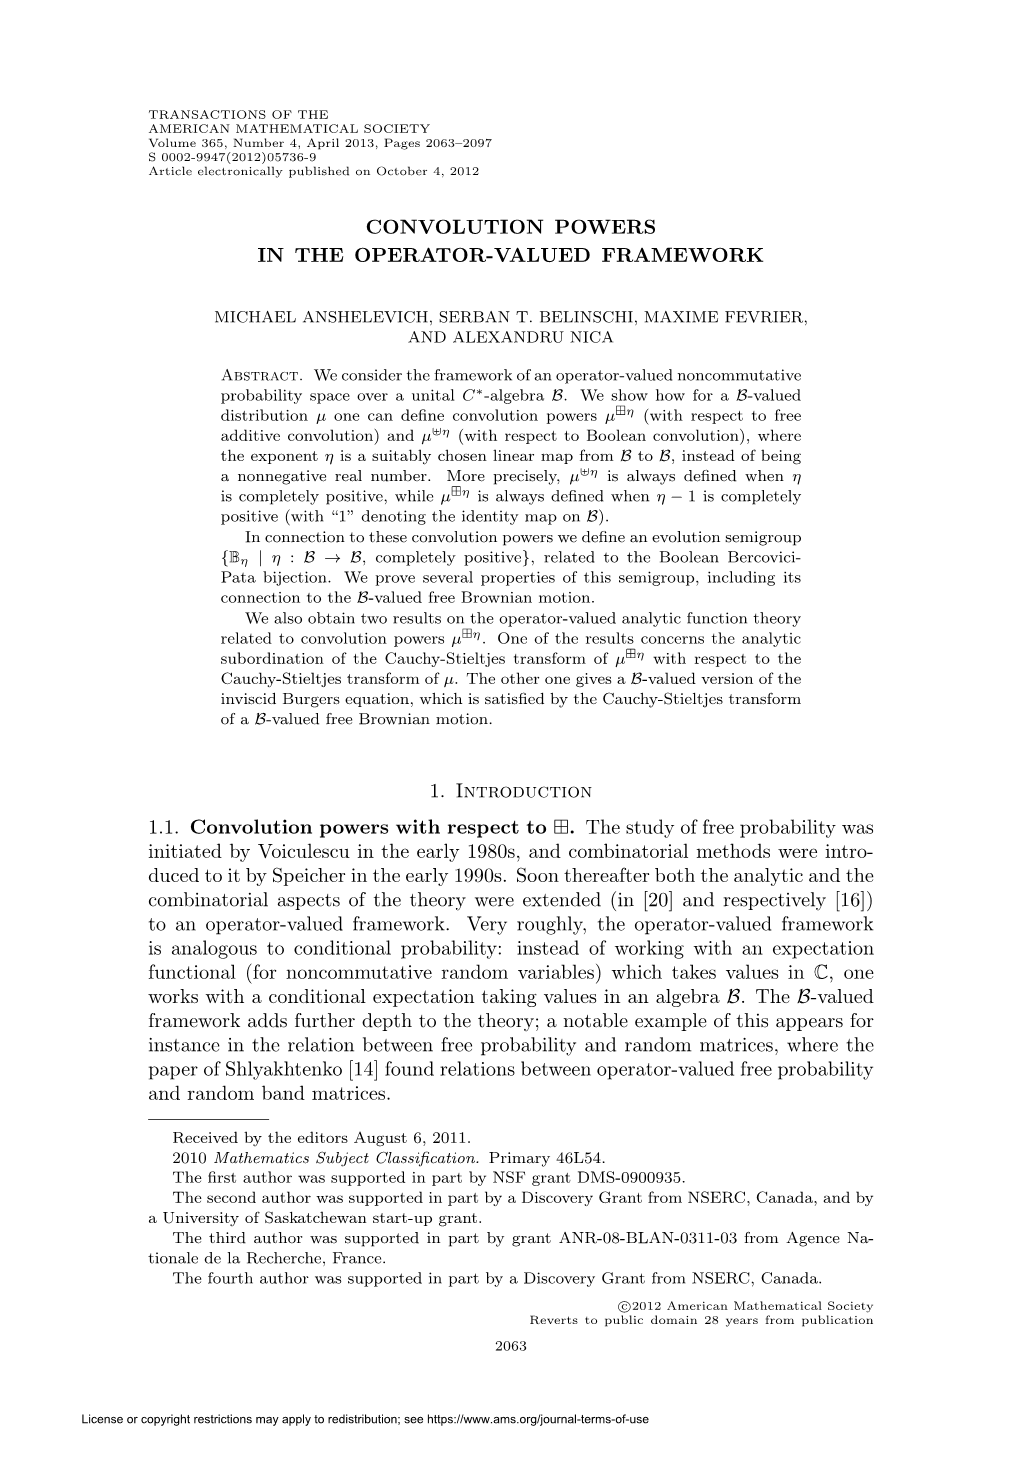 Convolution Powers in the Operator-Valued Framework